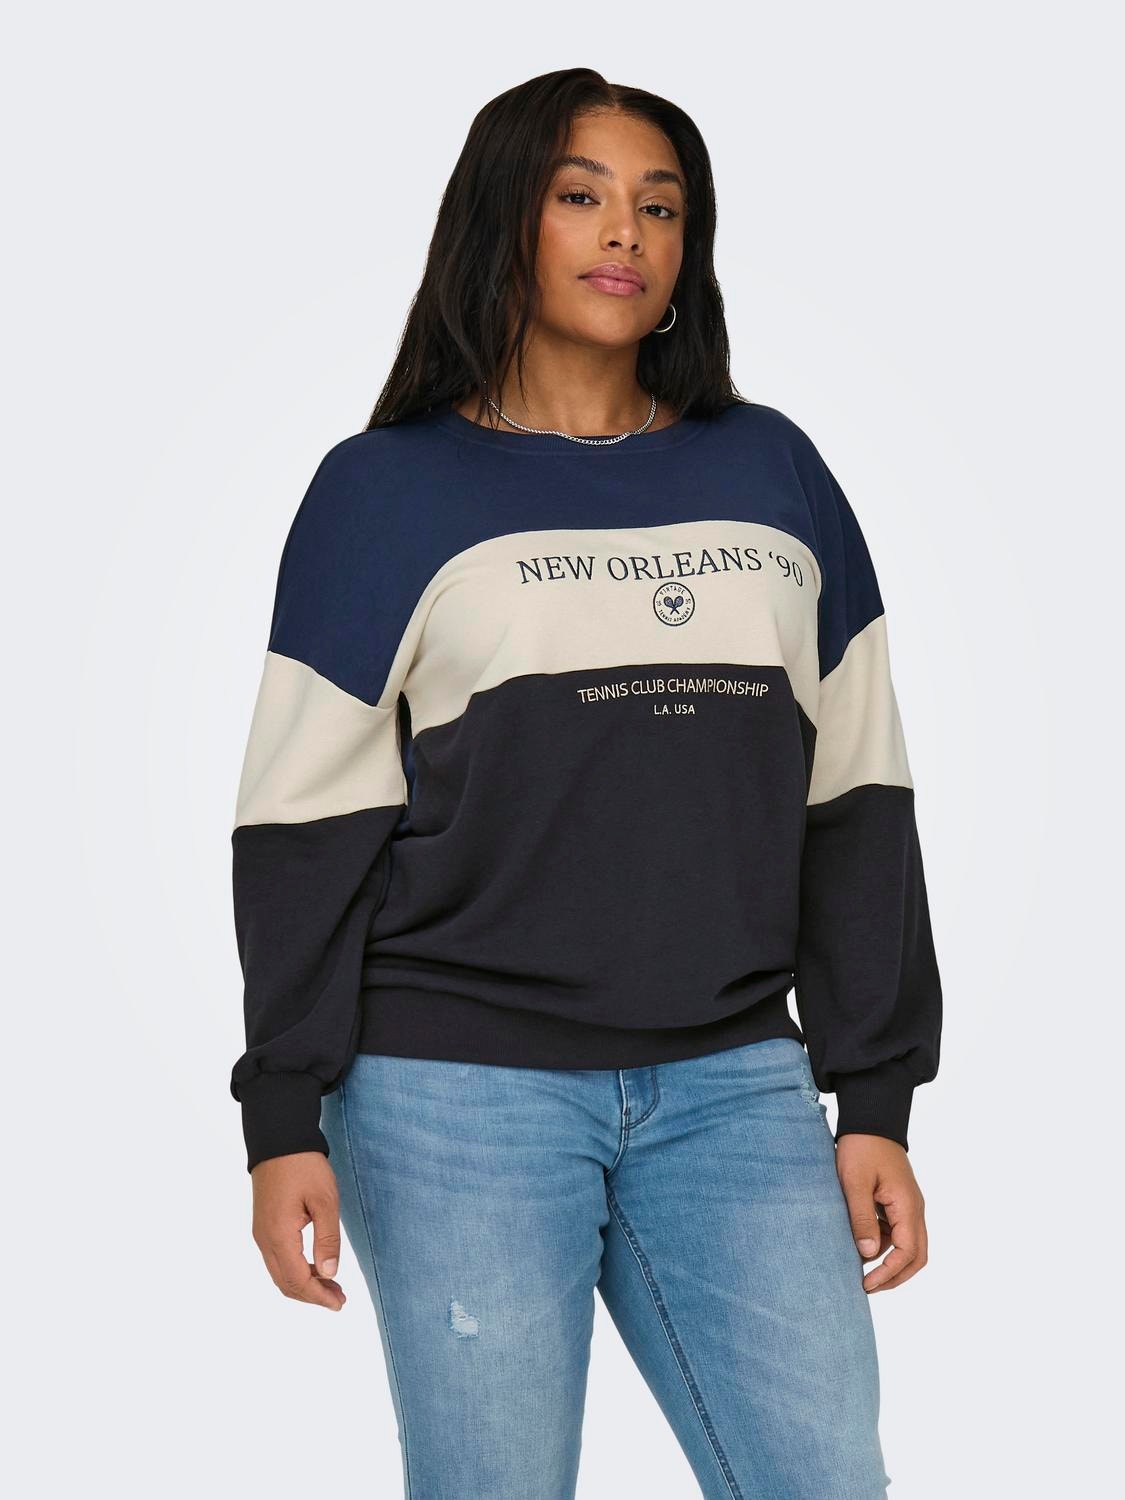 ONLY Sweat-shirt Regular Fit Col rond -Naval Academy - 15317411